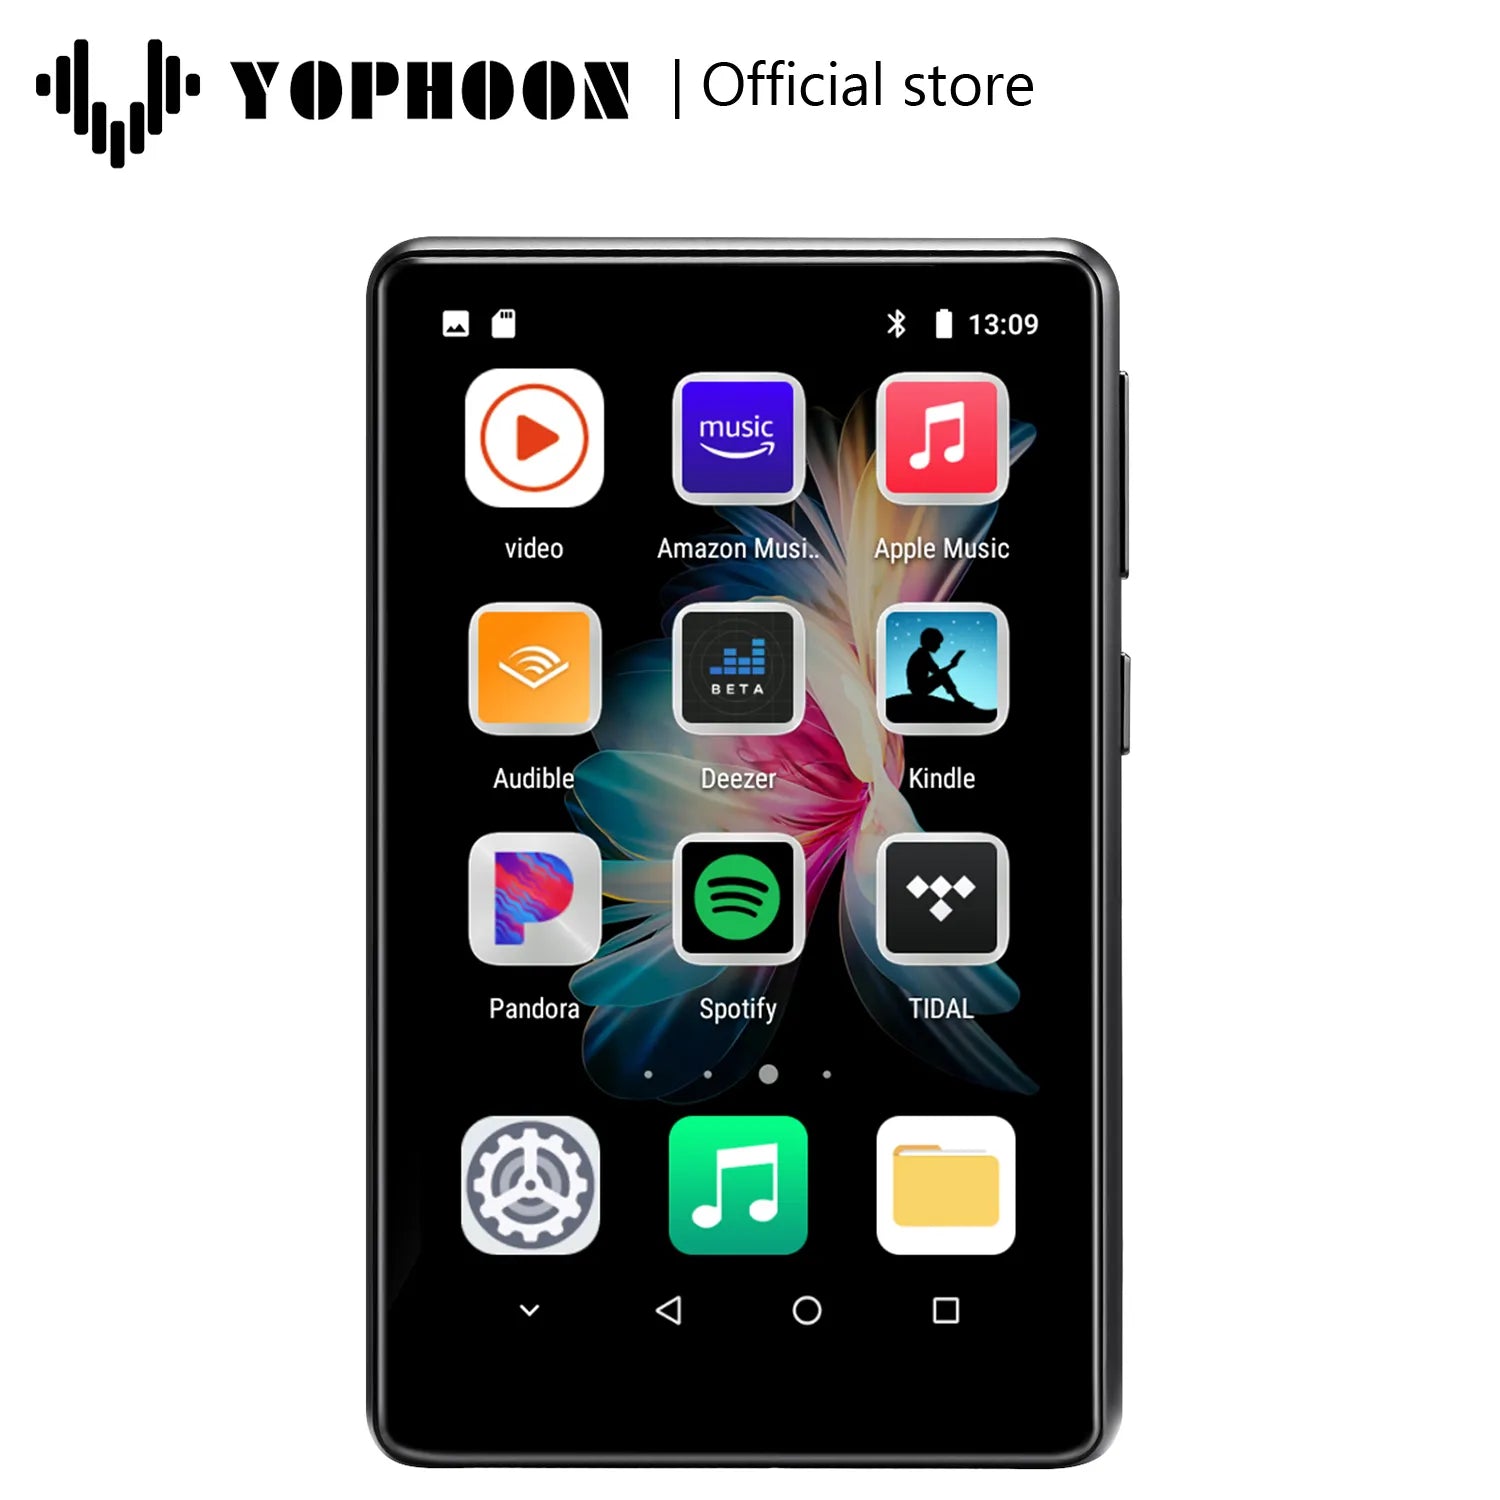 Yophoon New 4.0" WiFi MP3 Player Bluetooth MP4 Player Android 8.1 with Spotify Pandora Android Streaming Music Player HiFi Sound